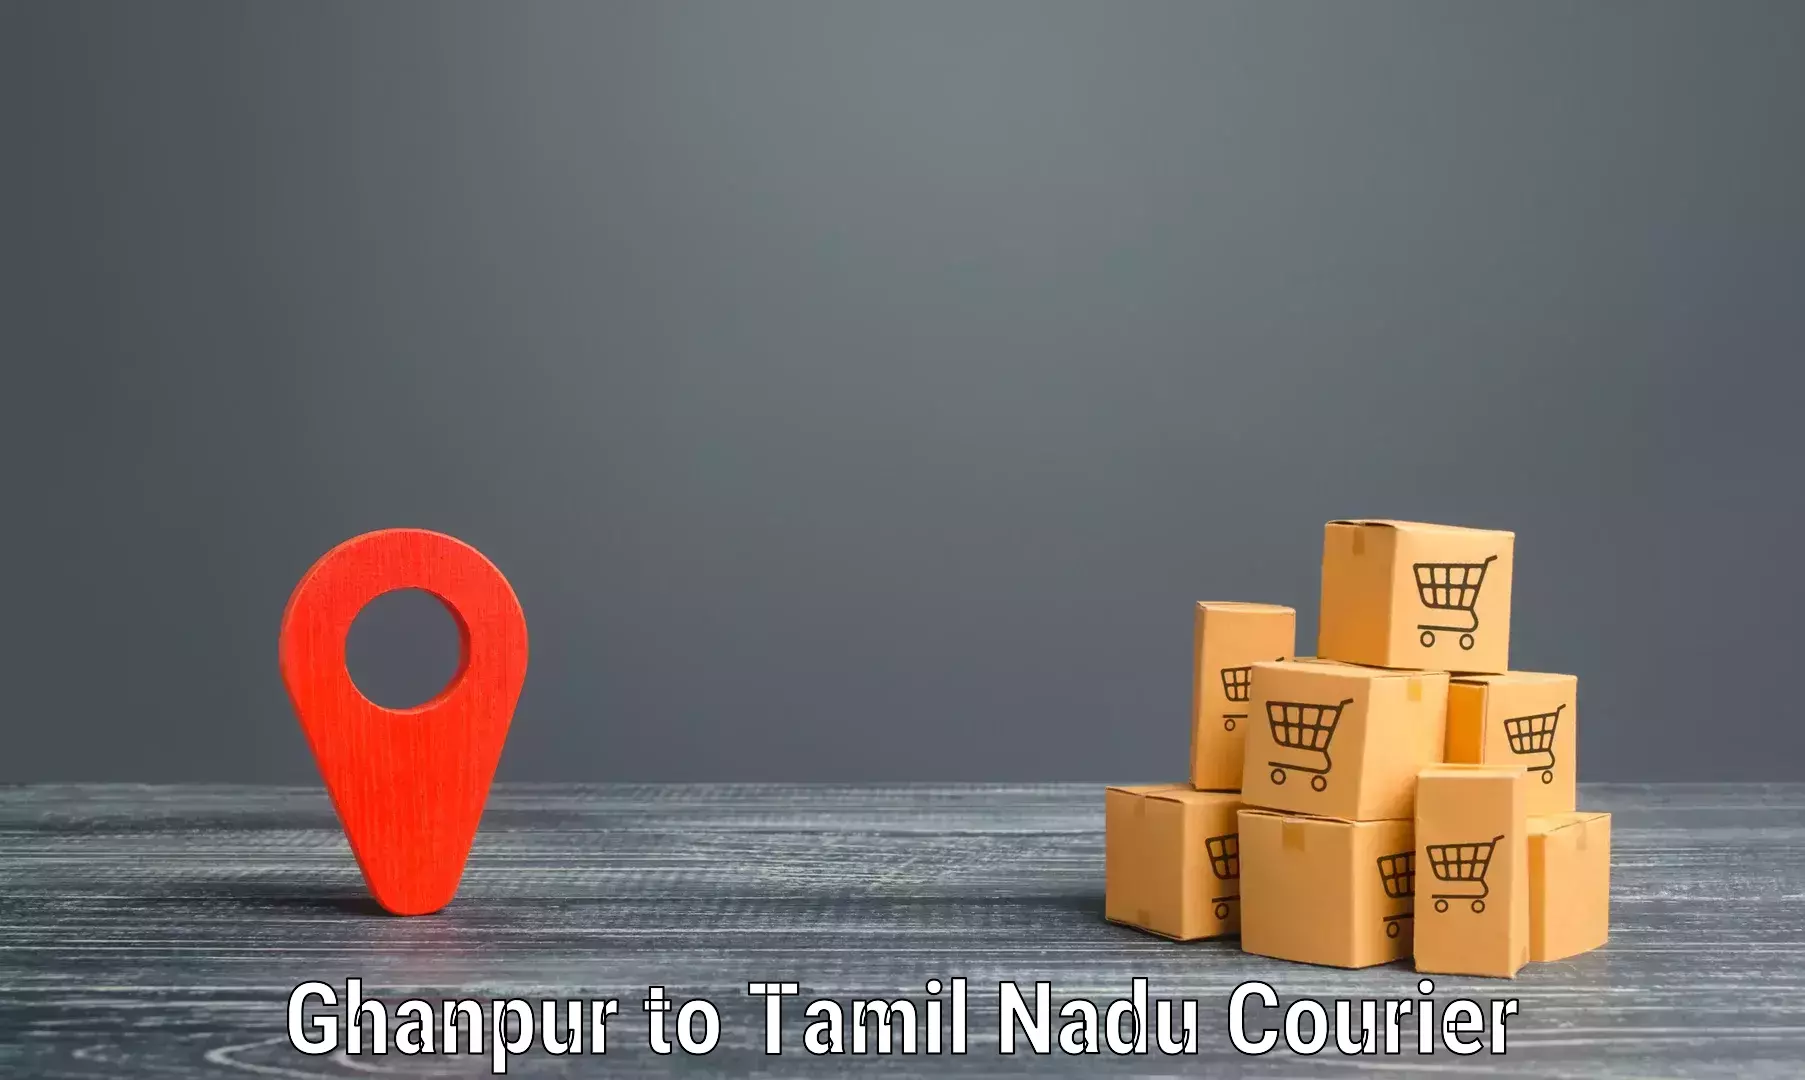 Courier service innovation Ghanpur to Tamil Nadu Agricultural University Coimbatore